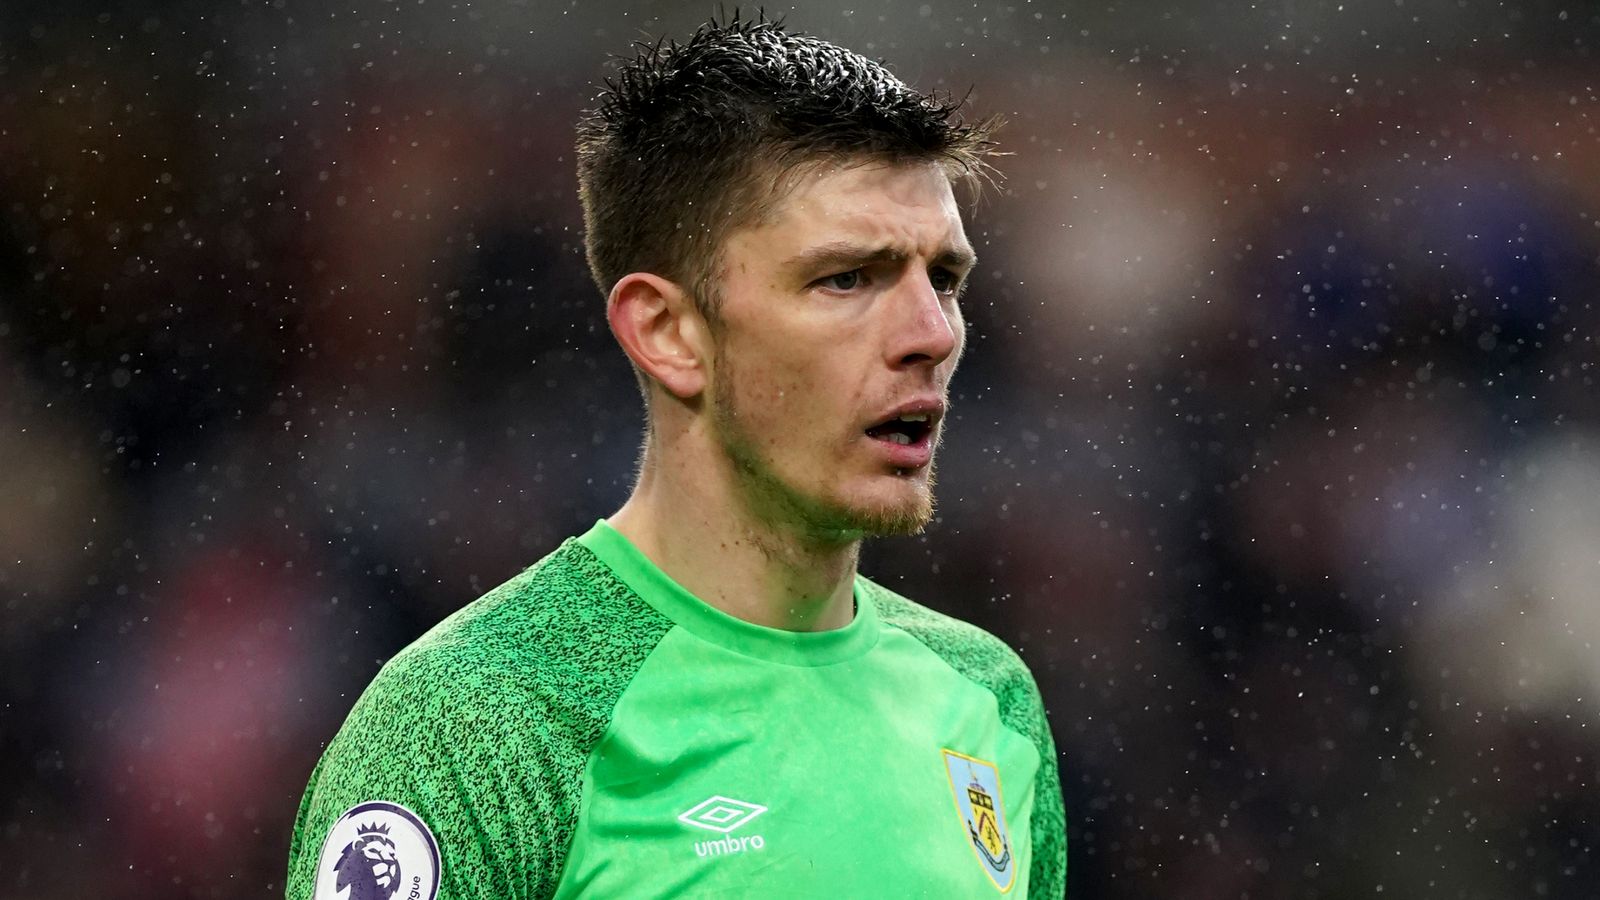 Nick Pope: Newcastle United in talks with Burnley over move to bring goalkeeper to St James’ Park